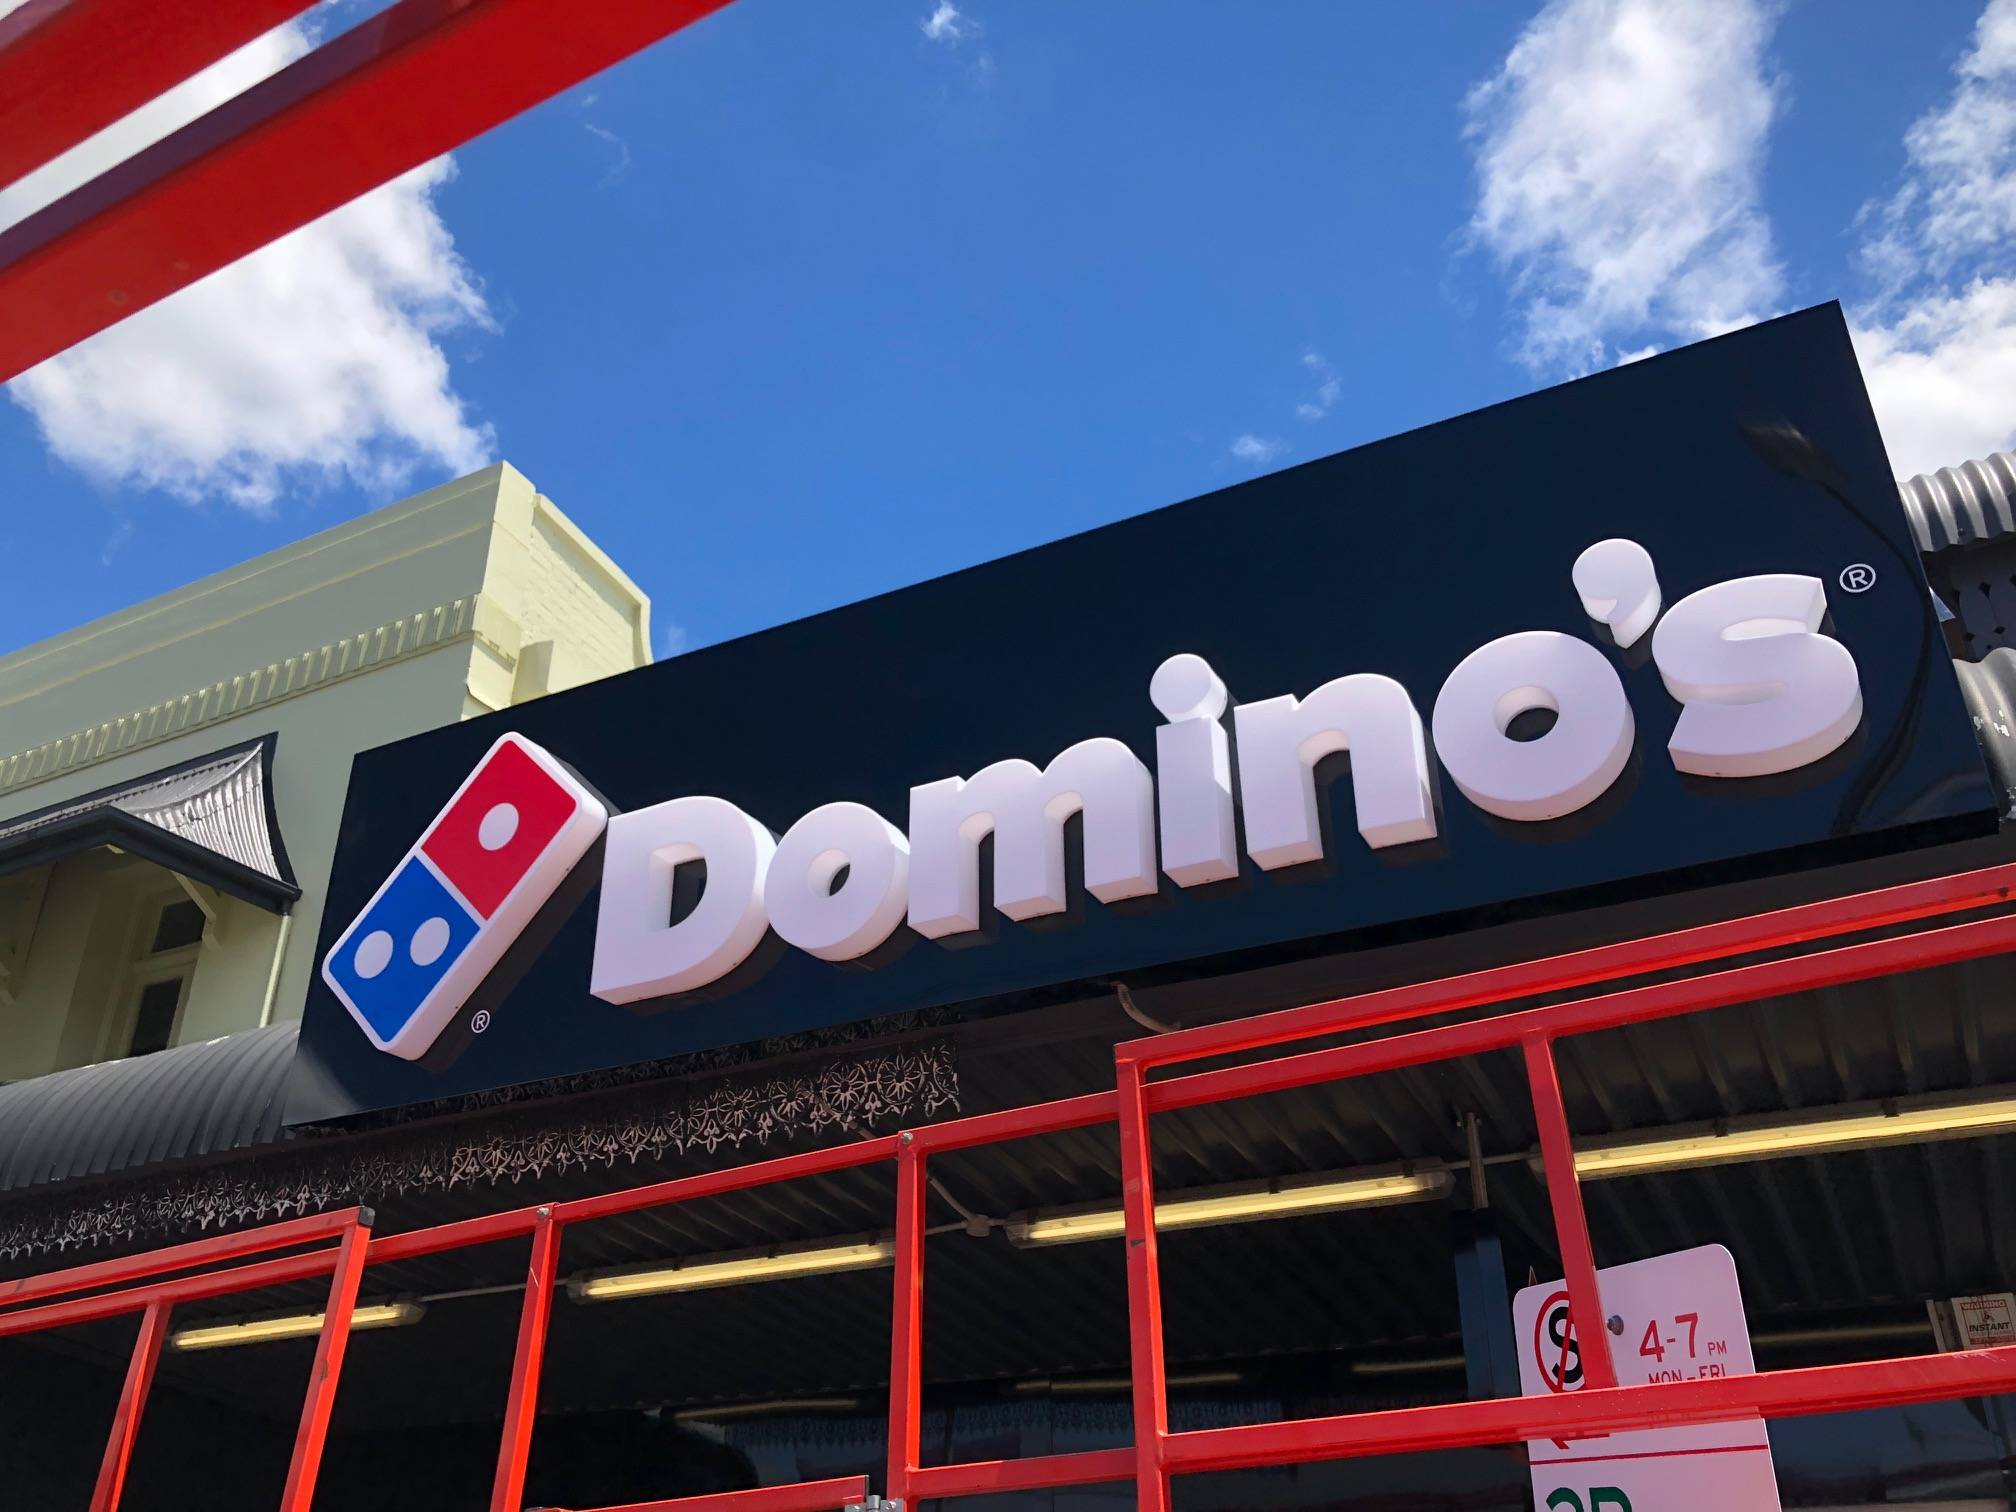 Domino's building signage and fabricated letters